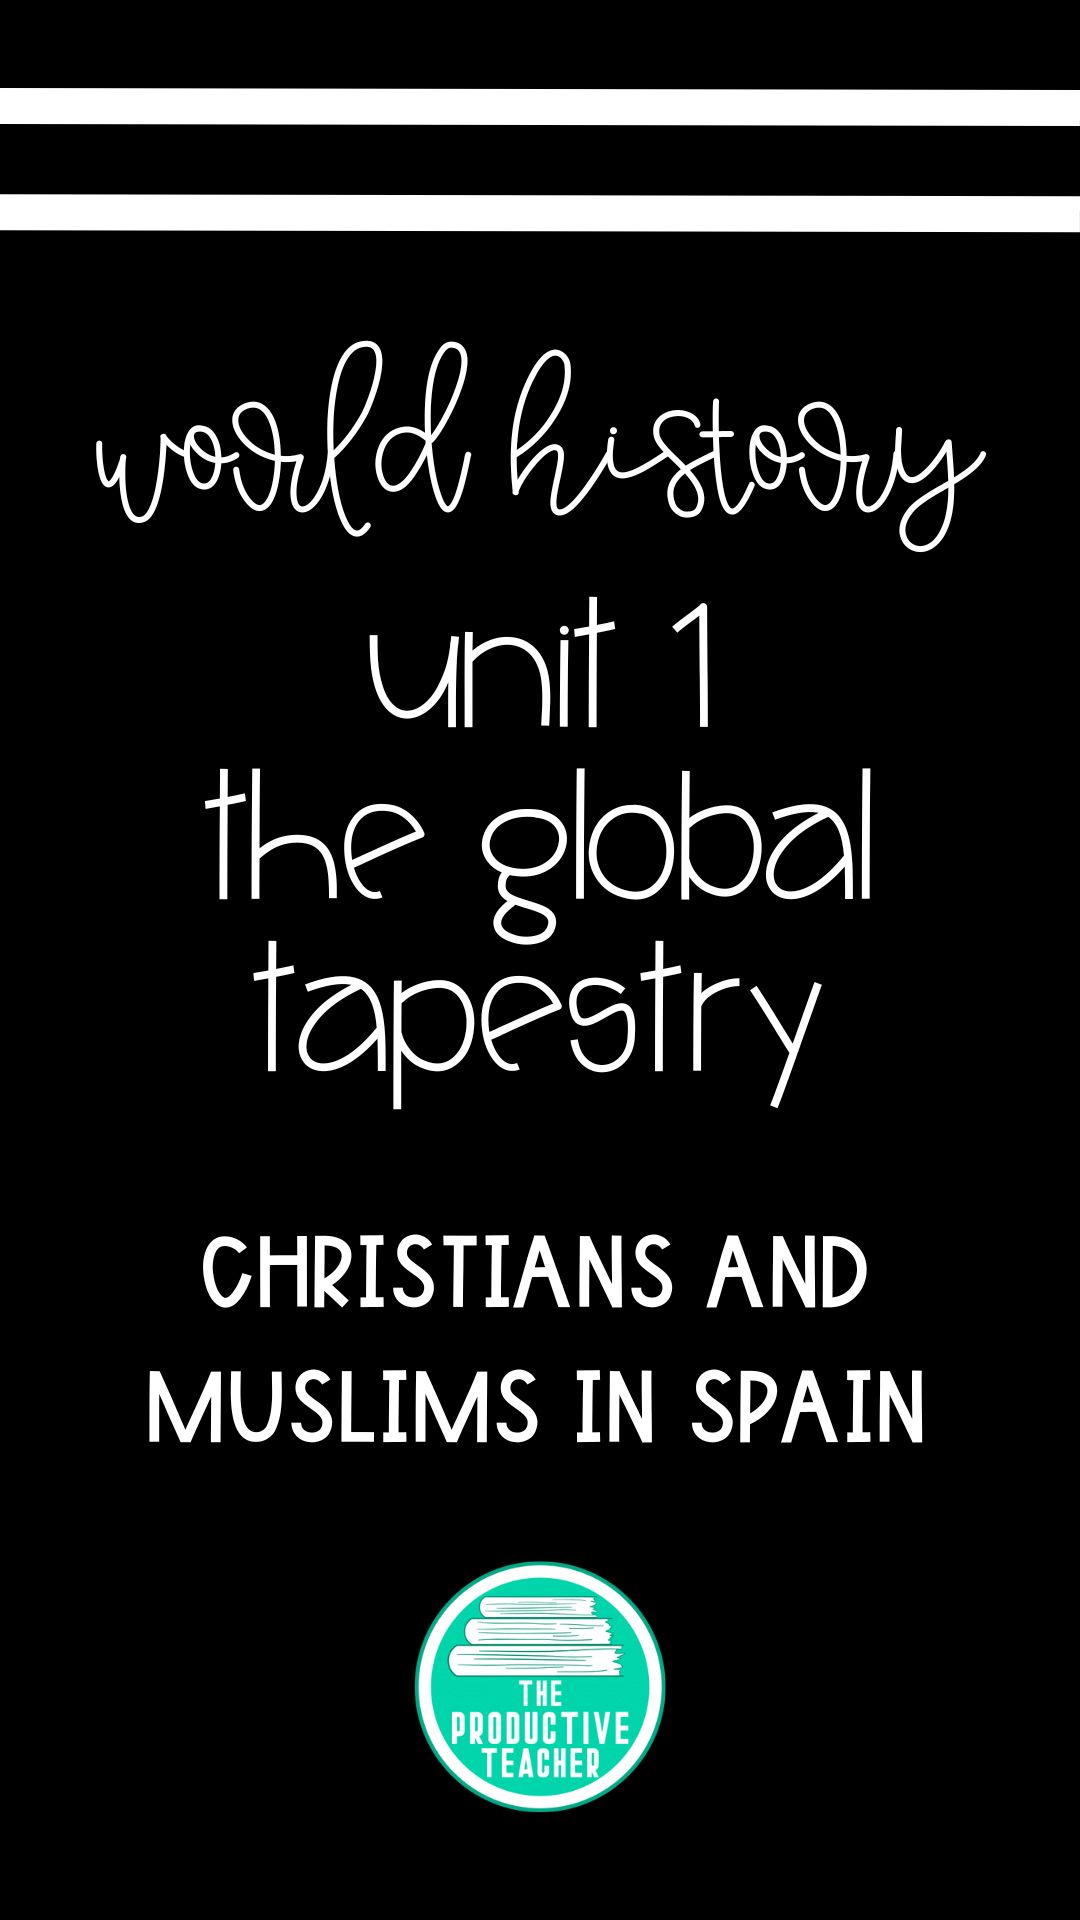 Christians and Muslims in Spain